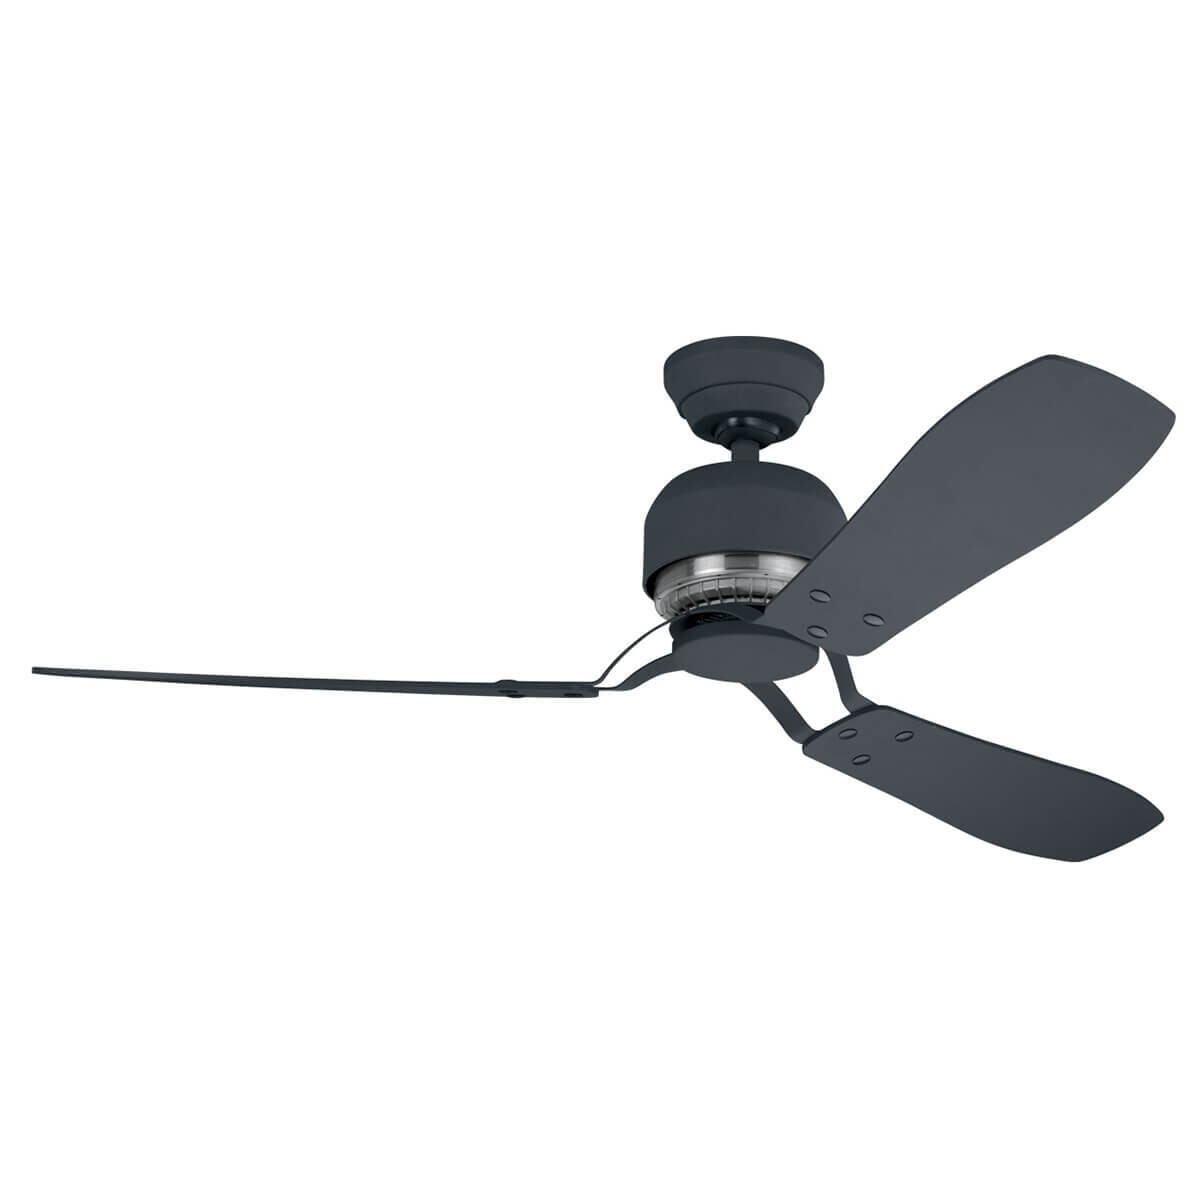 HUNTER INDUSTRIE II GRAPHITE ceiling fan Ø132 with Wall control included